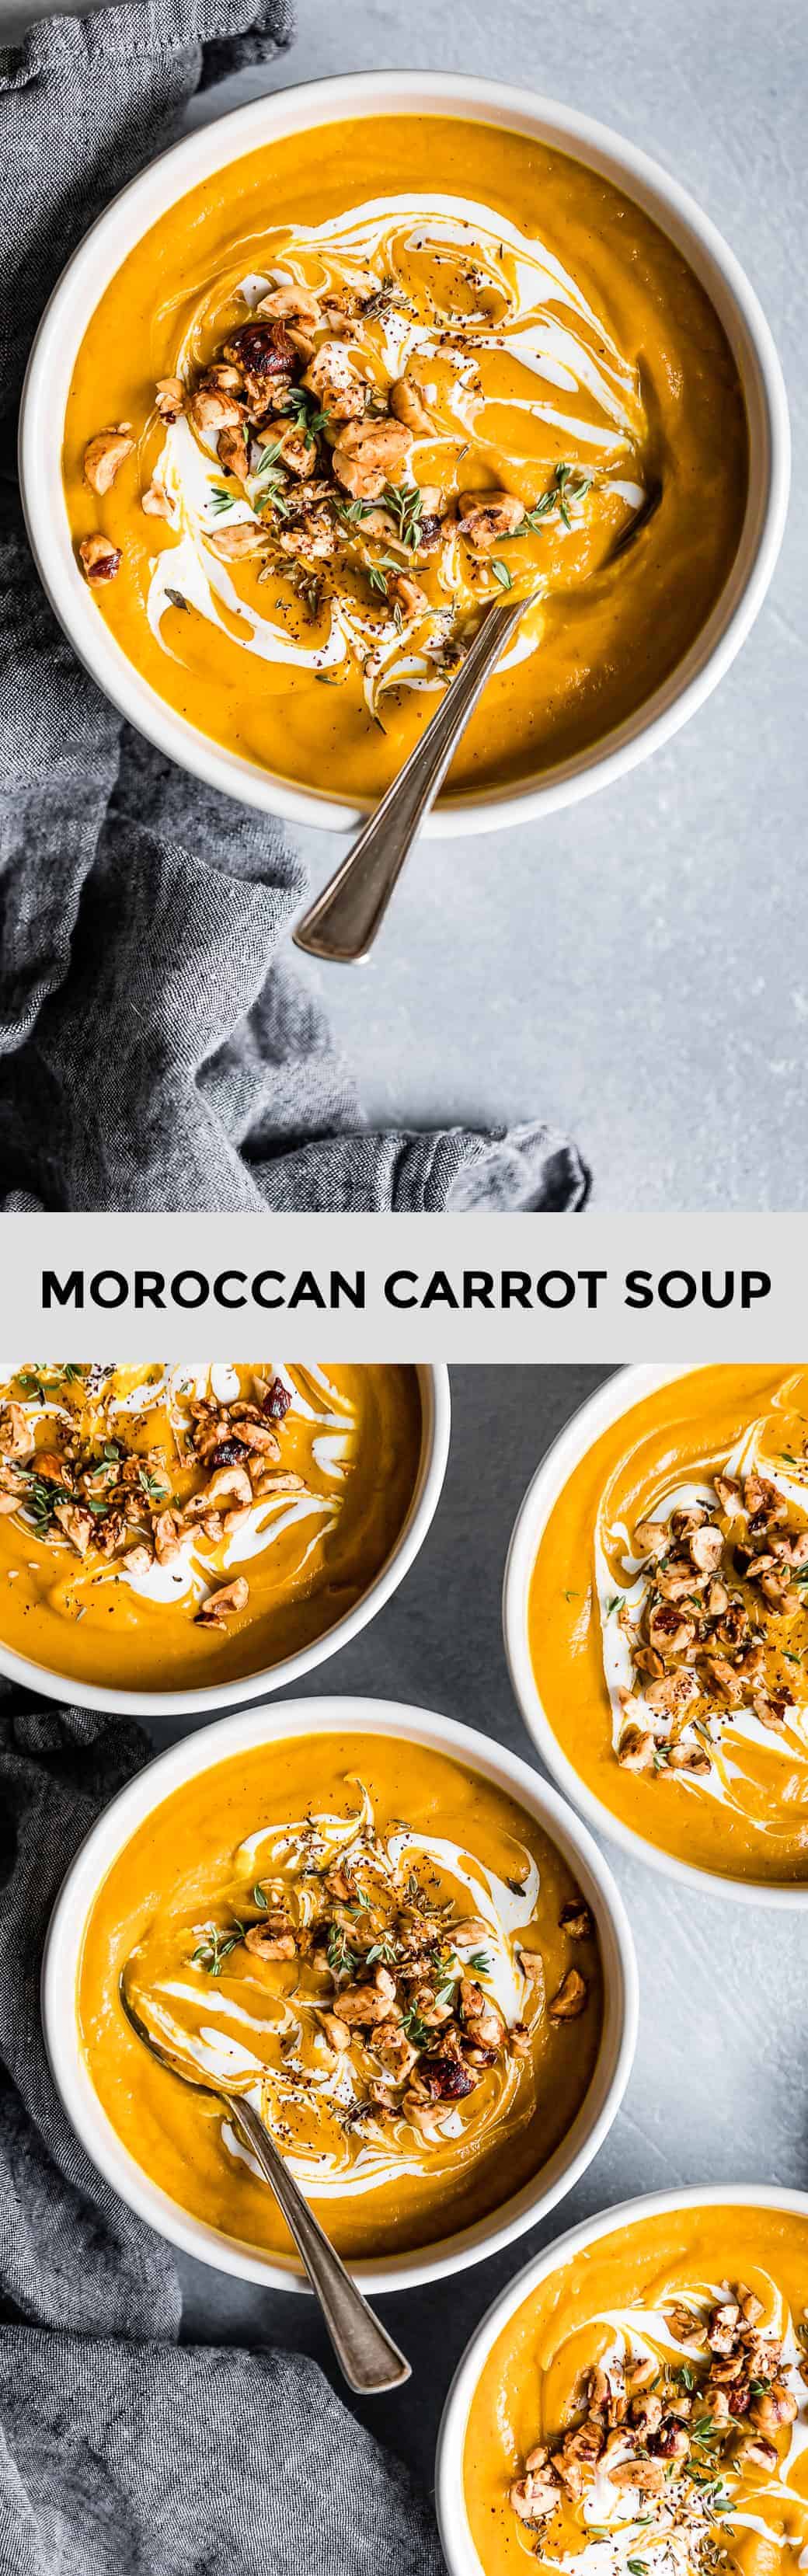 Moroccan Carrot Soup with Cinnamon Hazelnuts